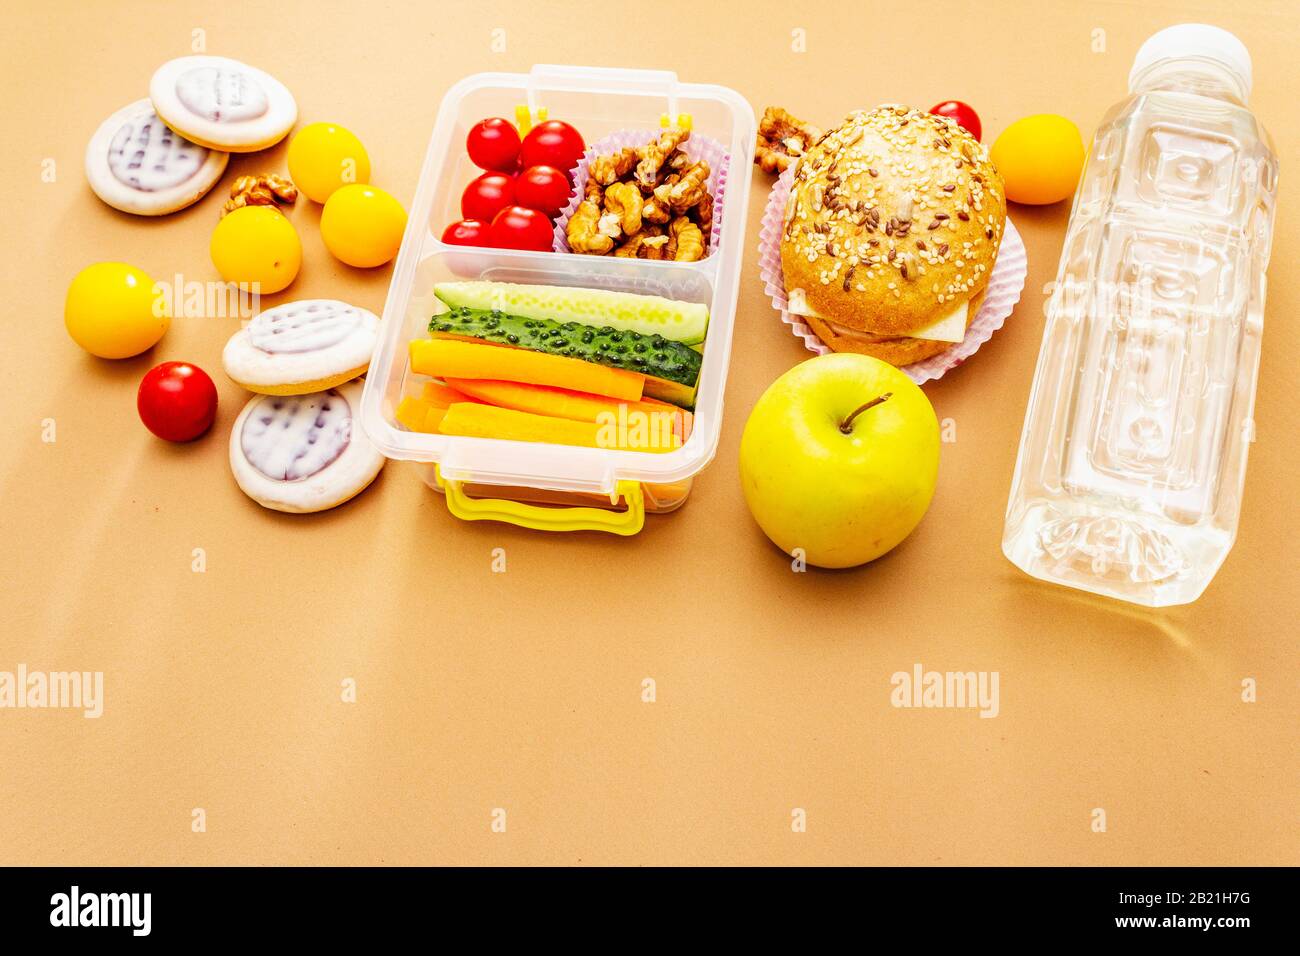 https://c8.alamy.com/comp/2B21H7G/school-lunch-box-with-sandwich-fresh-fruits-vegetables-water-and-nuts-healthy-eating-habits-for-kids-back-to-school-concept-on-bright-beige-back-2B21H7G.jpg